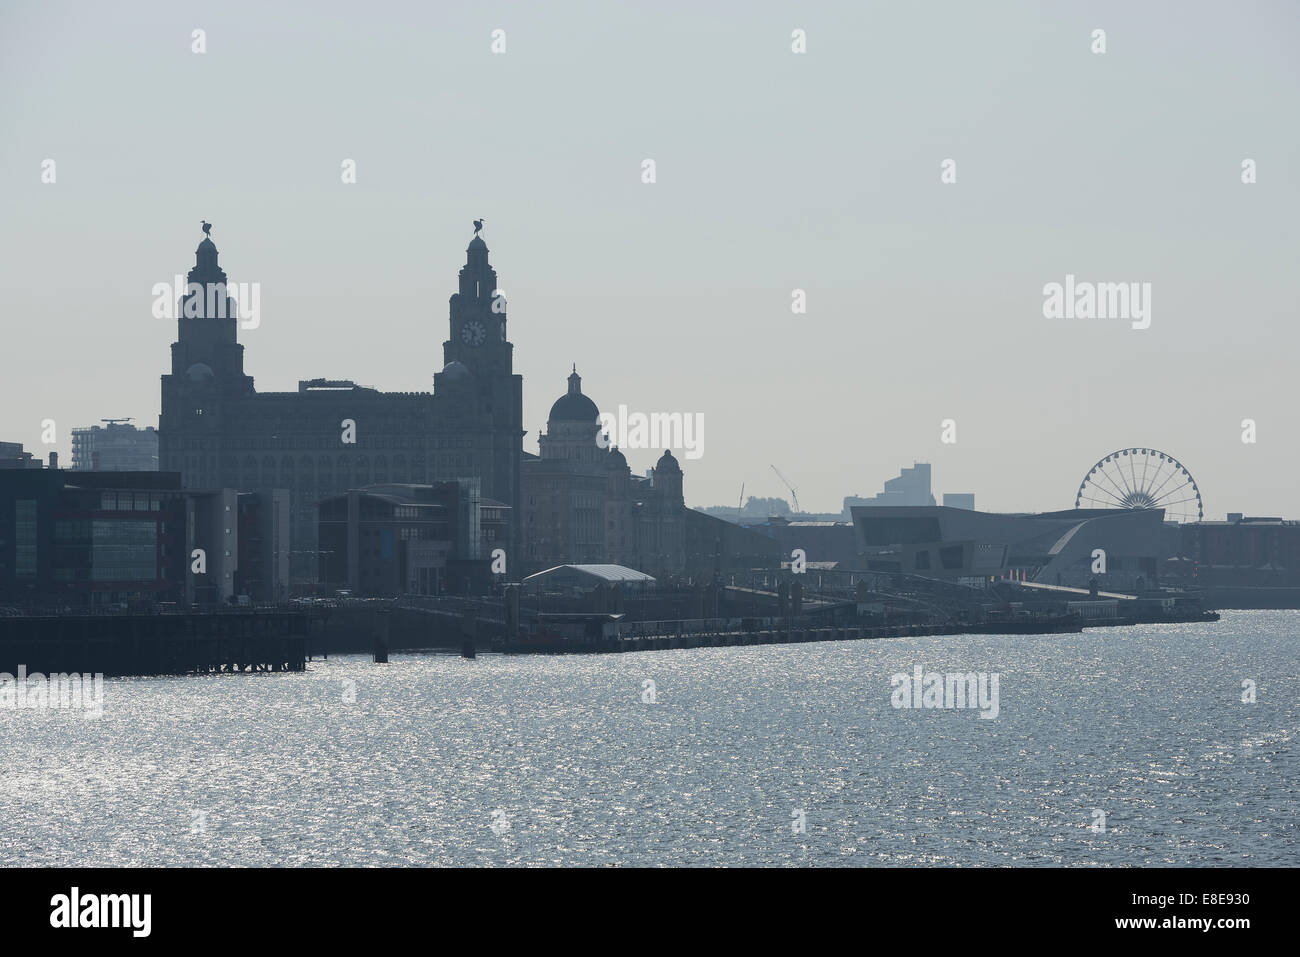 The Liver Building and Liverpool waterfront skyline in silhouette Stock Photo